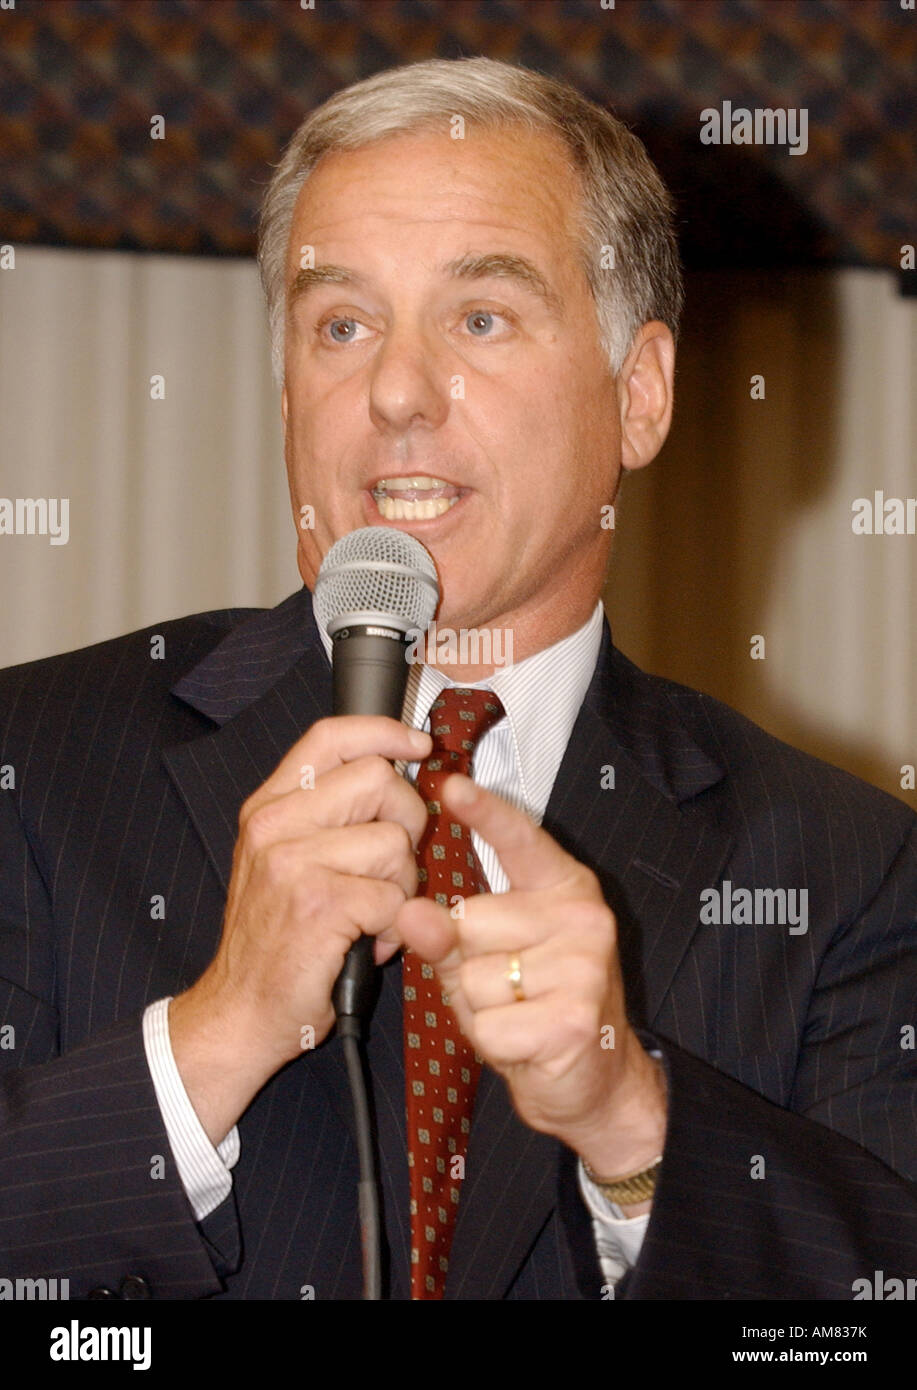 Former Governor Howard Dean D VT speaks during the Presidential Candidates Forum in Arlington VA on friday  This is Stock Photo